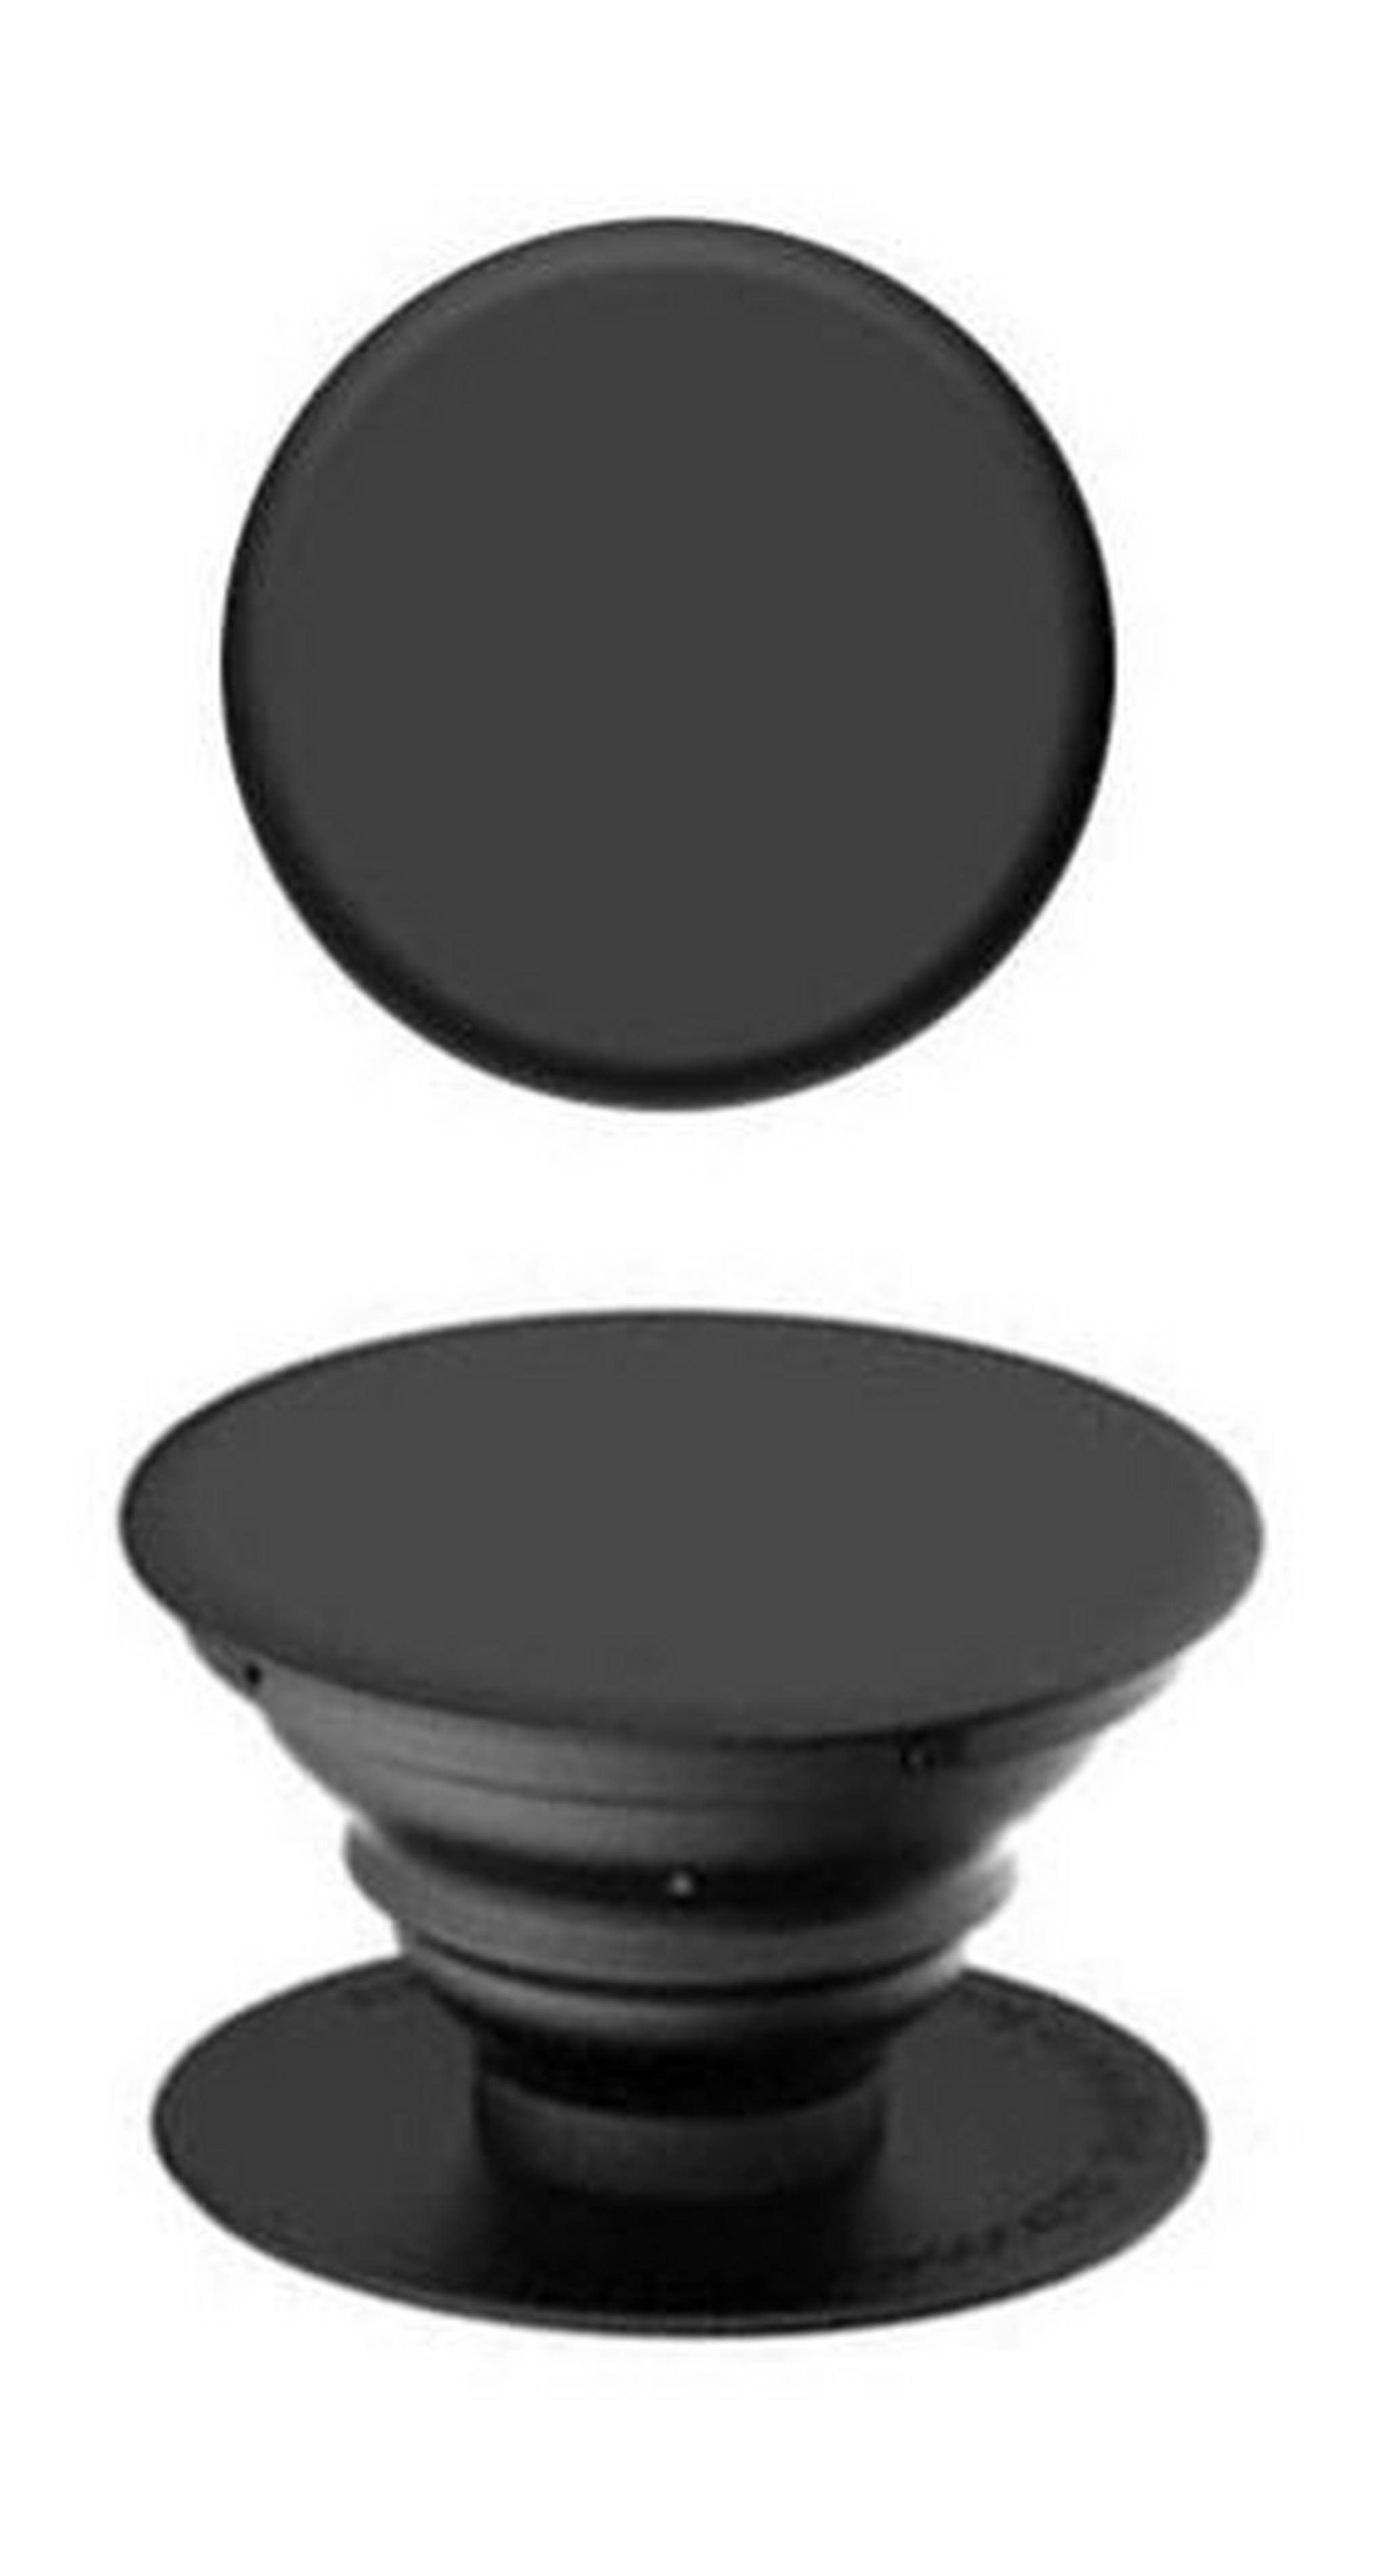 Popsockets Phone Stand and Grip - Black